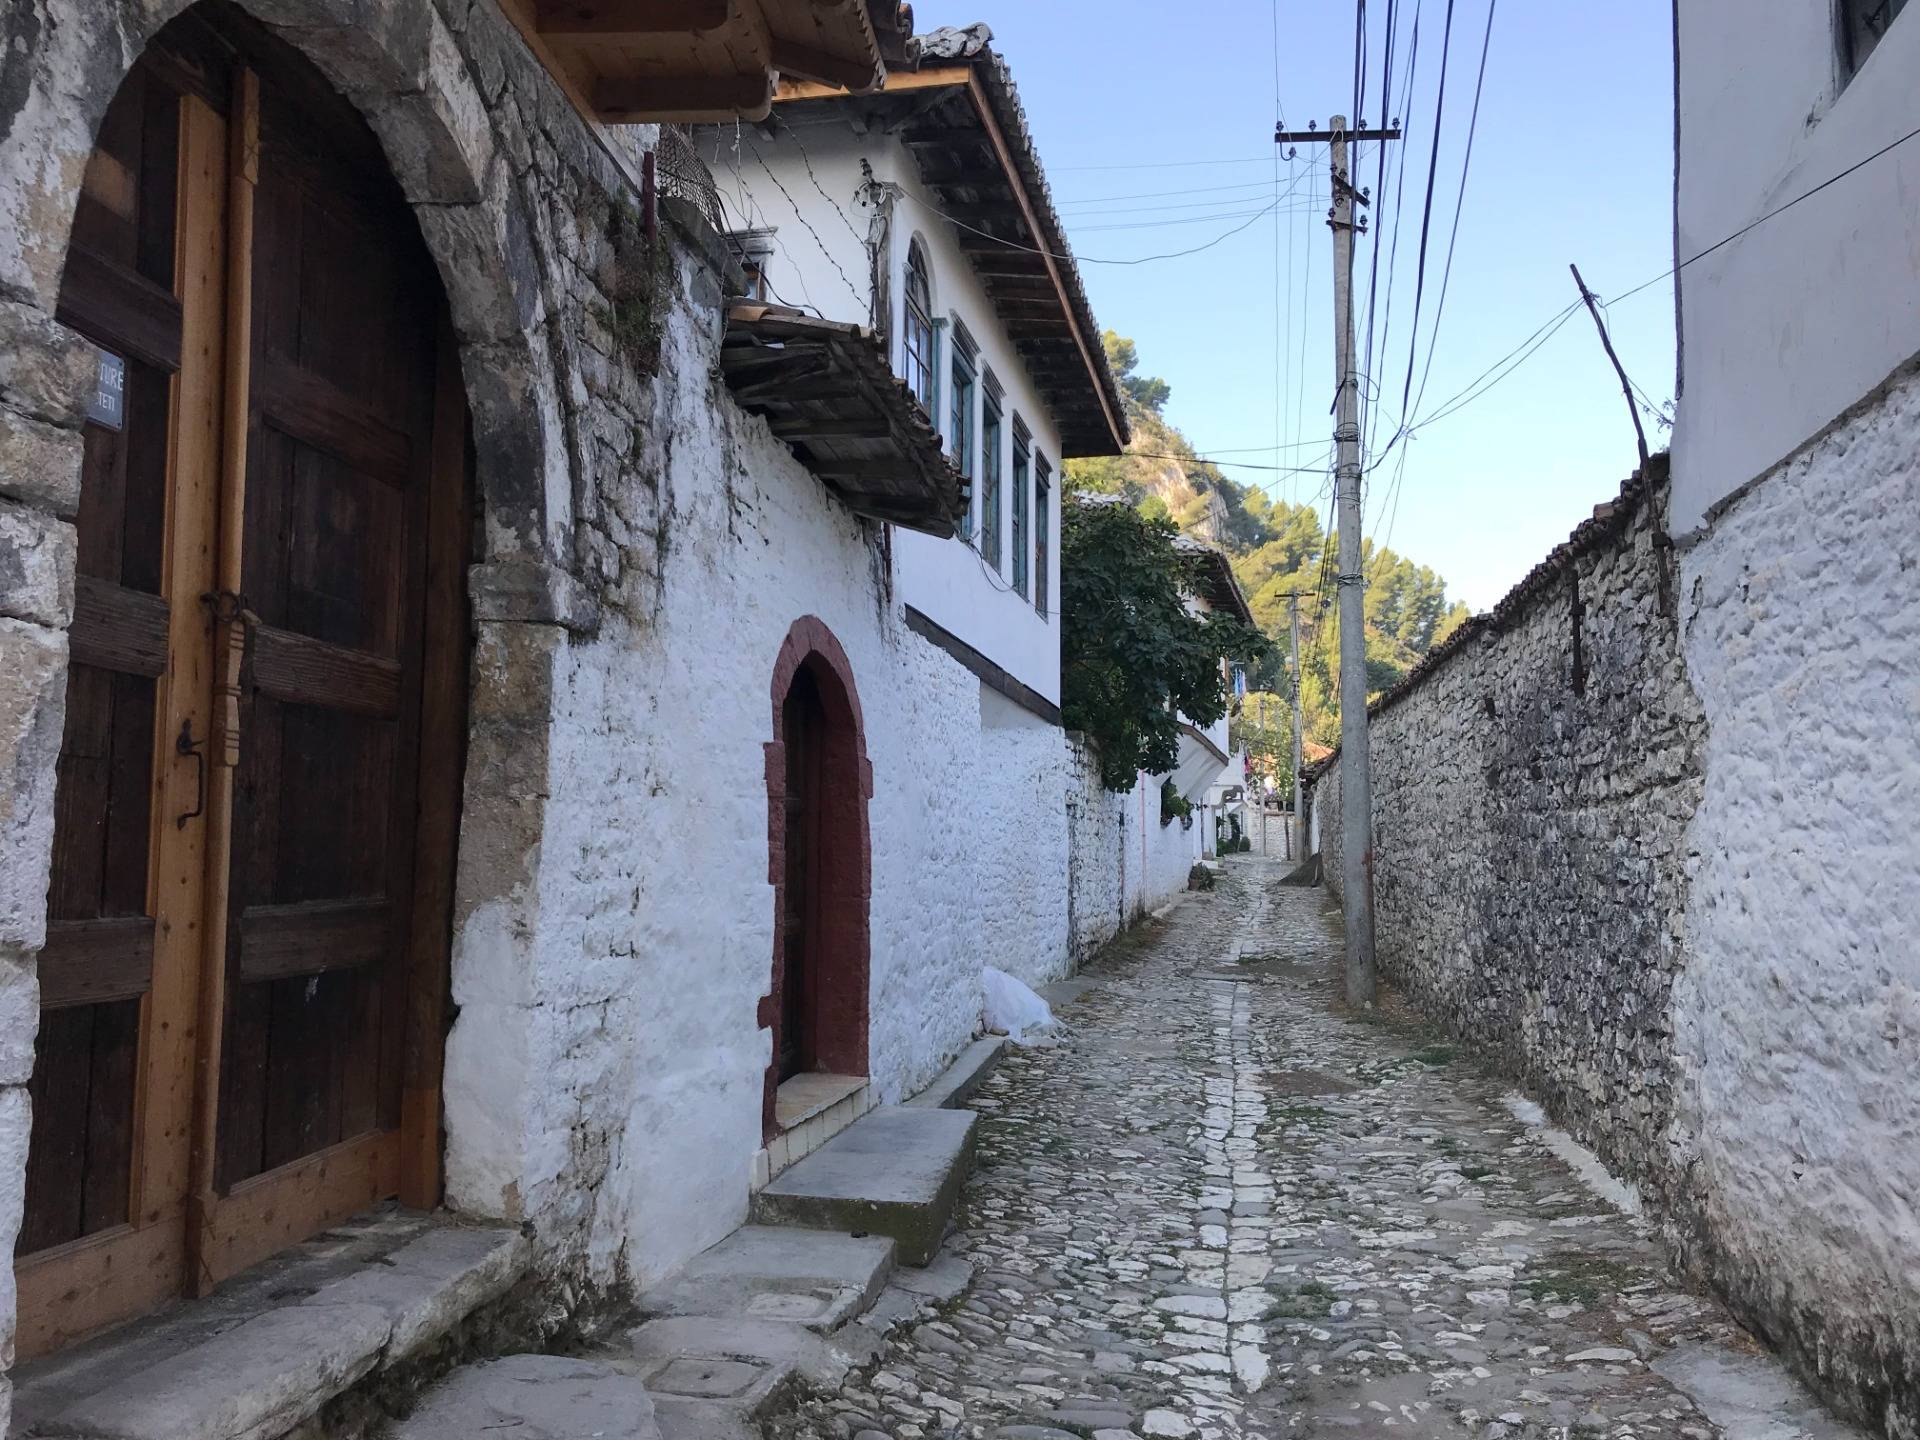 Narrow streets, old stones everywhere